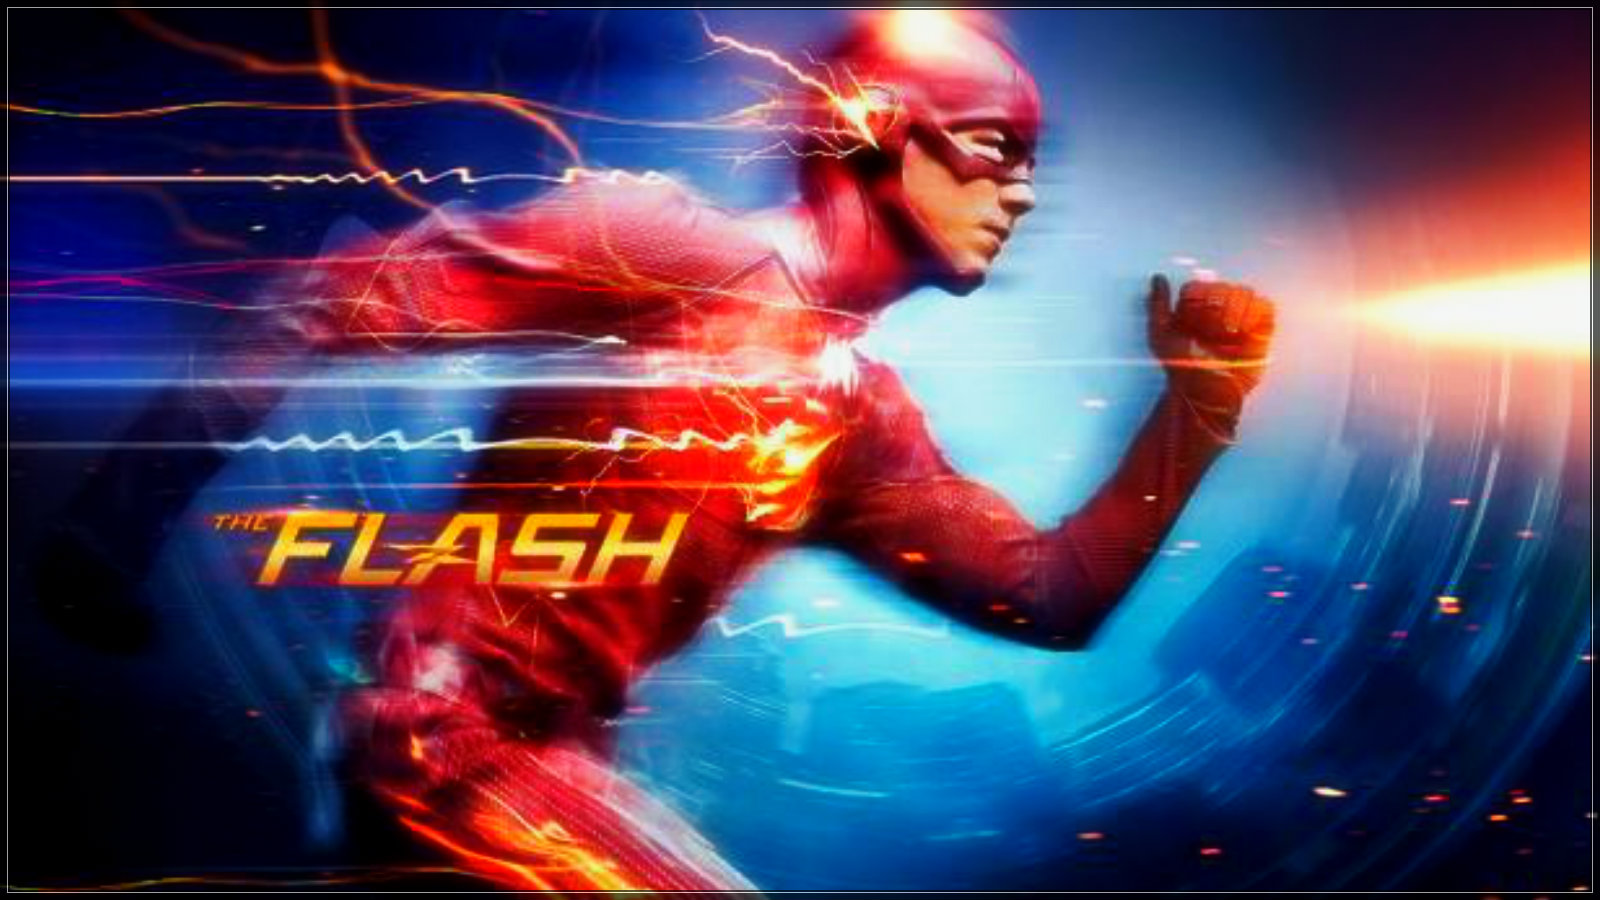 The Flash CW images The Flash HD wallpaper and background photos